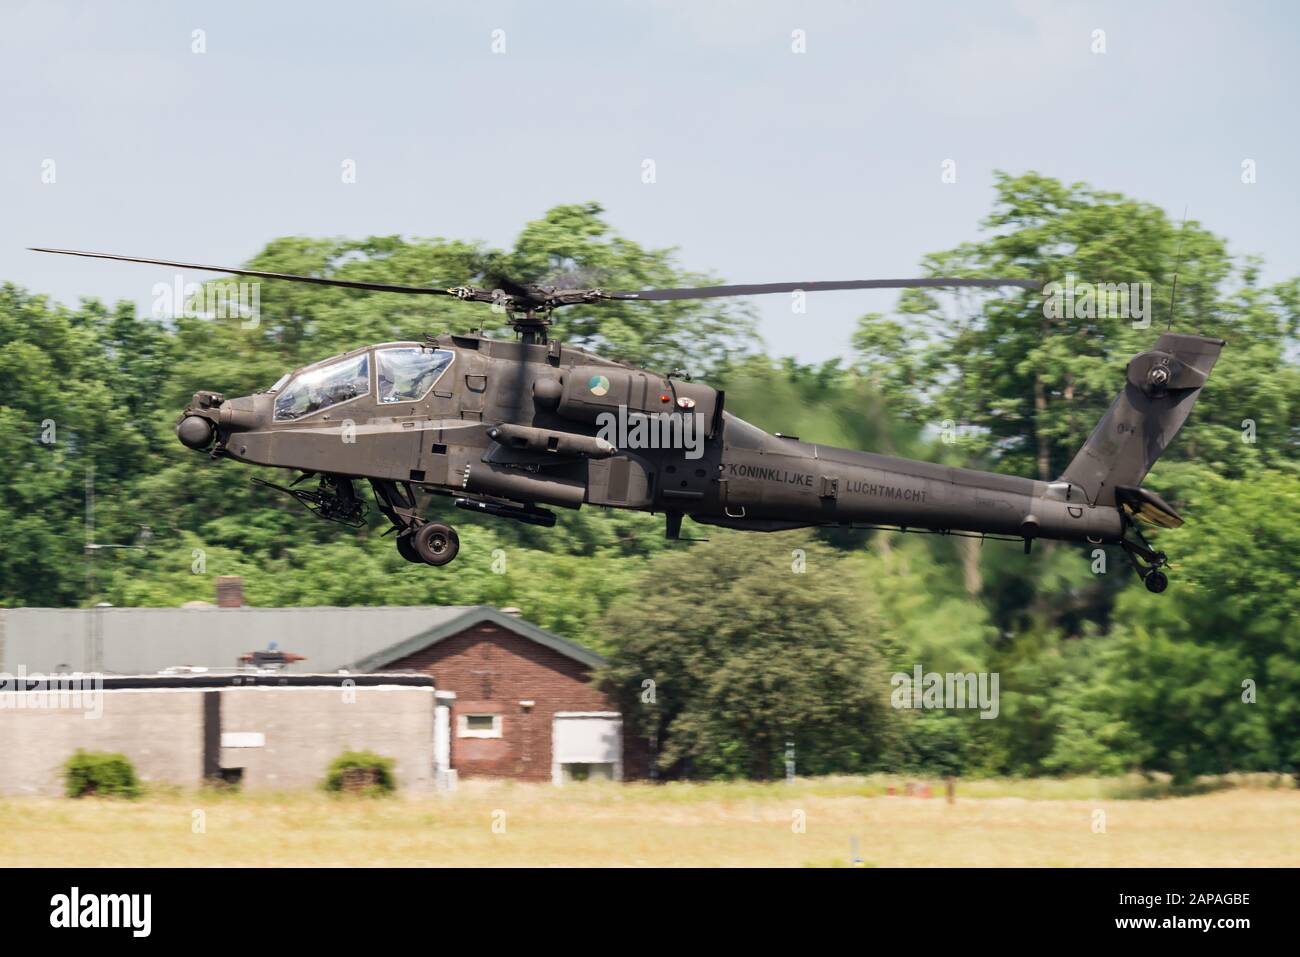 A Boeing AH-64 Apache attack helicopter of the 301 Squadron of the Royal Netherlands Air Force at the Gilze-Rijen Air Base. Stock Photo